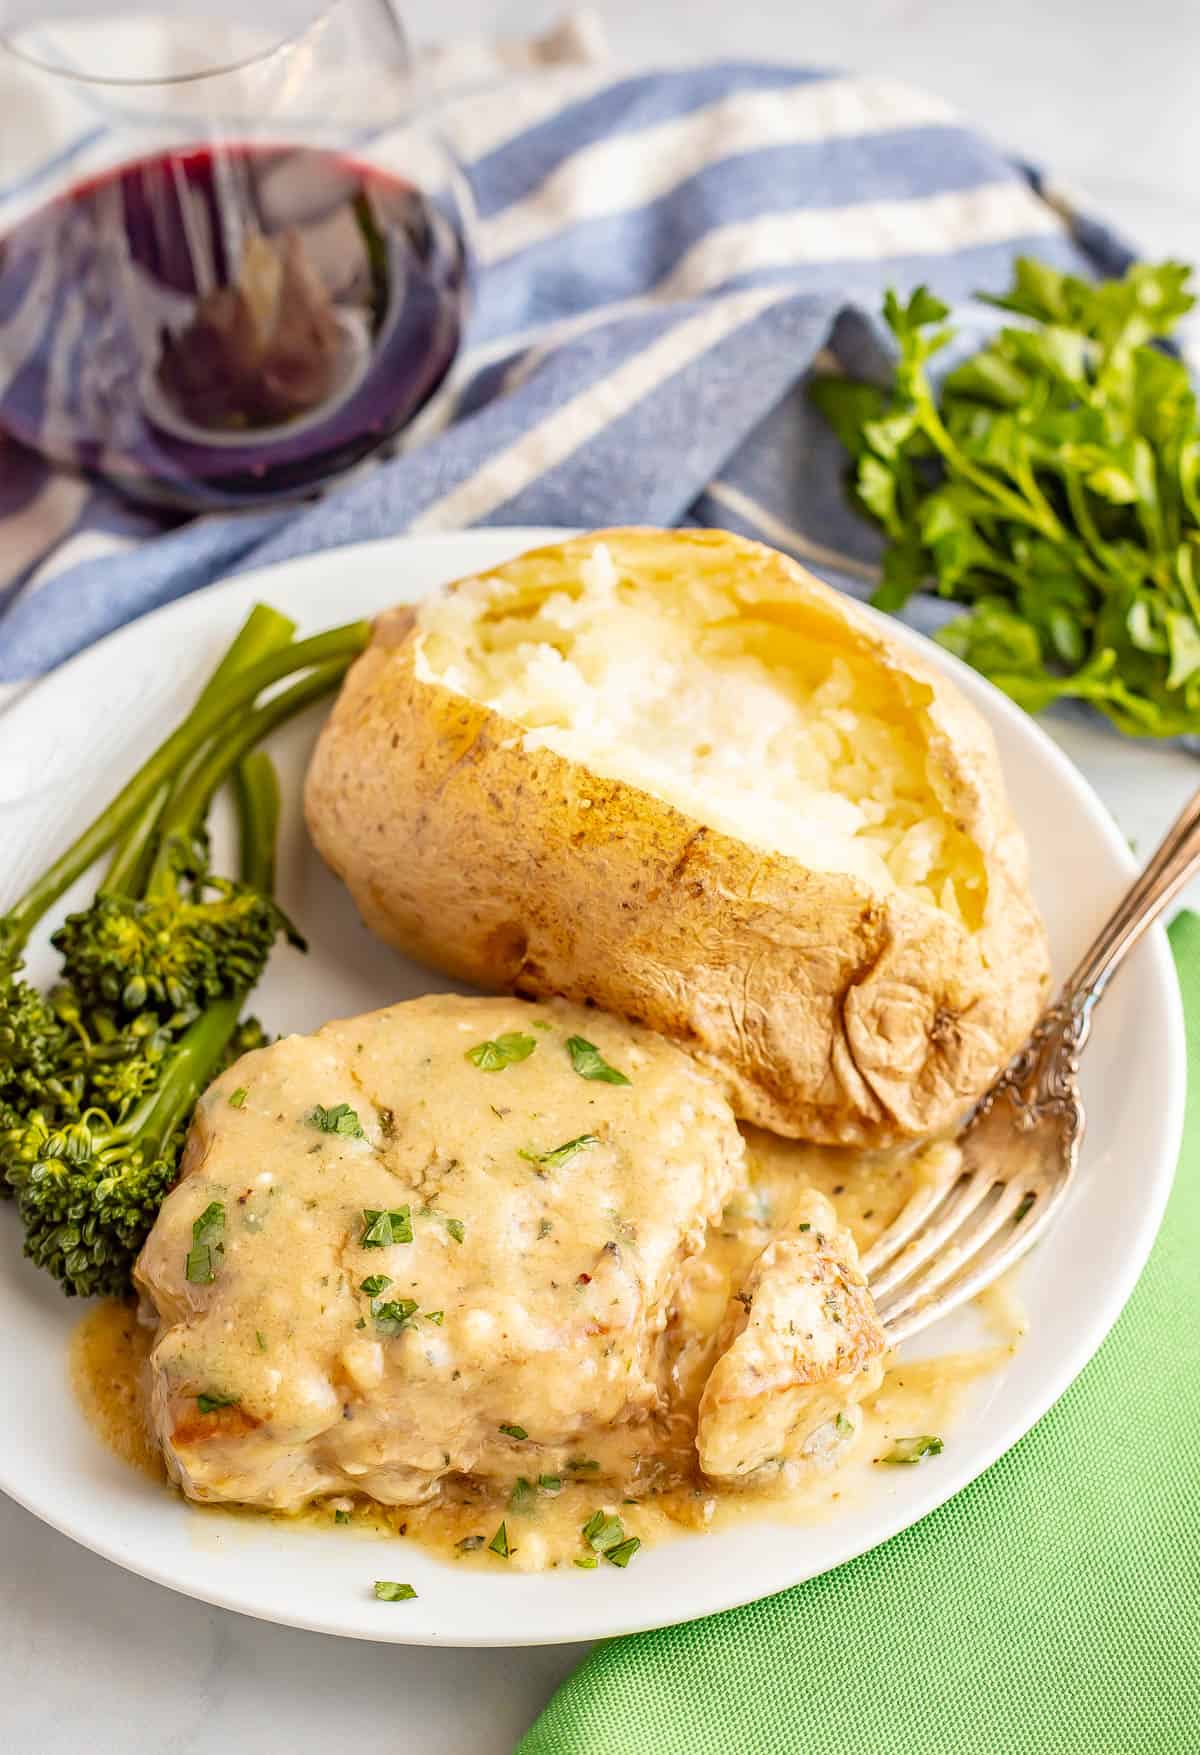 A white dinner plate with a baked potato, broccolini, pork chop with gravy and a fork resting on the side, with a glass of red wine in the background.